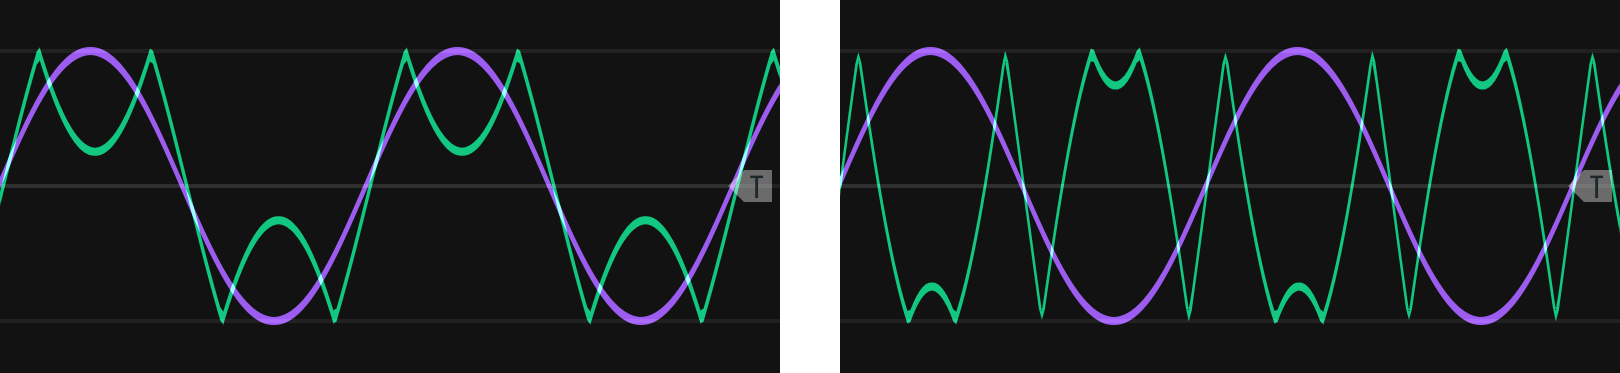 Wavefolding (green) of a sine wave (purple). The fold parameter moves the top and bottom portions of the wave to their respective boundaries where they reflect (left). Further increase of the fold parameter causes them to reach the opposing boundary and reflect again (right), a repeatable process that creates additional folds.